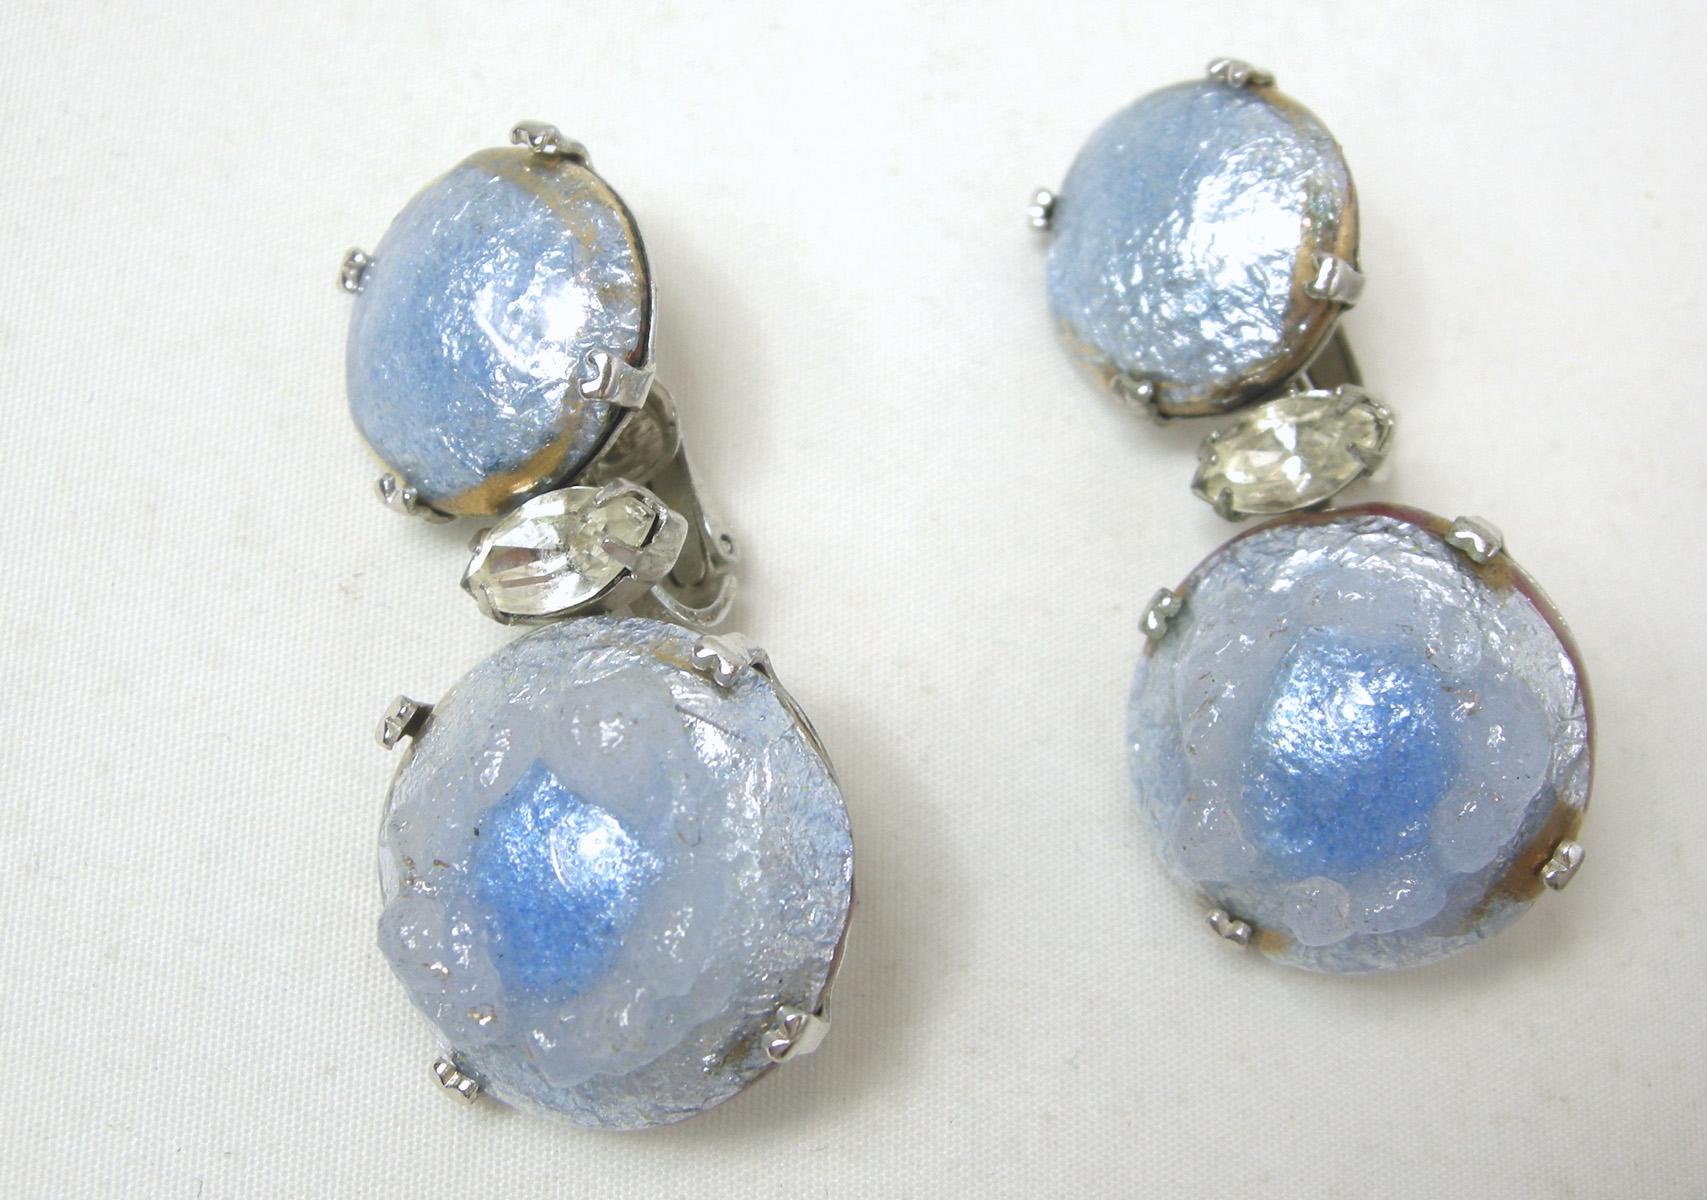 I have never seen such beautiful drop clip earrings.  I first thought they were French because of the blue iridescent stones.  The bottom part has a 3-dimensional floral design in the middle with a drop of blue in the center.  These earrings measure